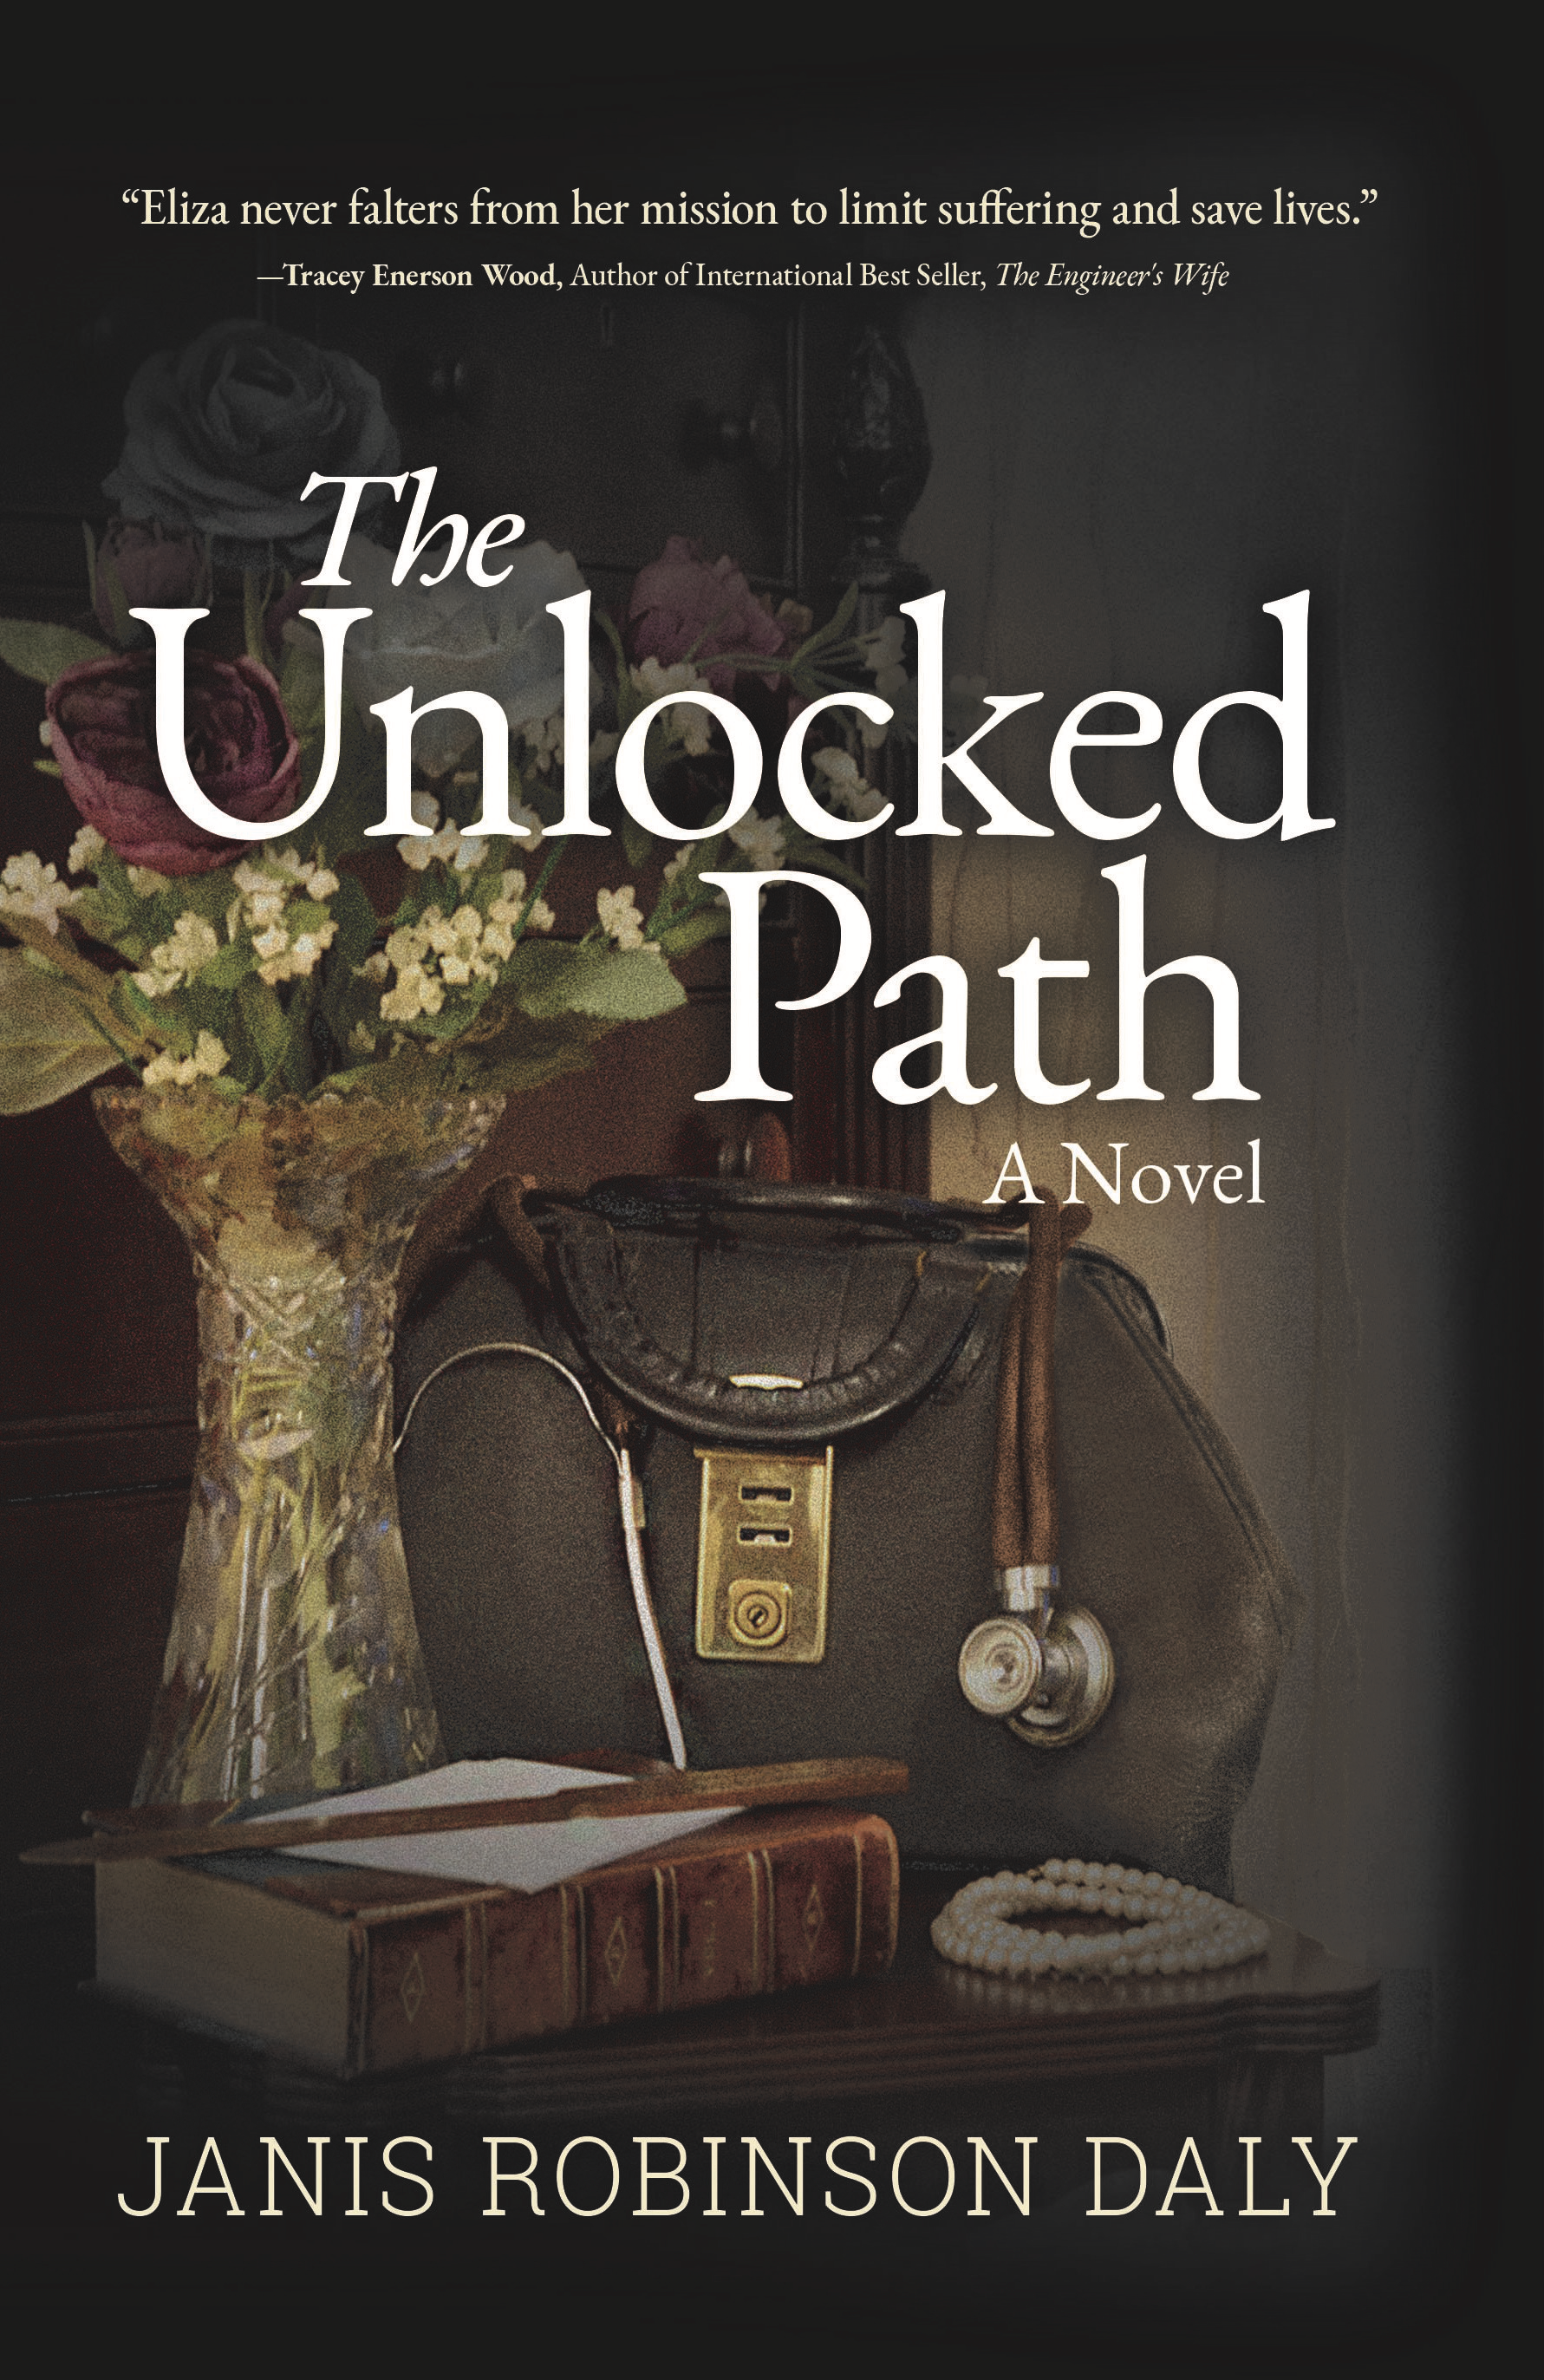 The Unlocked Path_A Novel full front cover